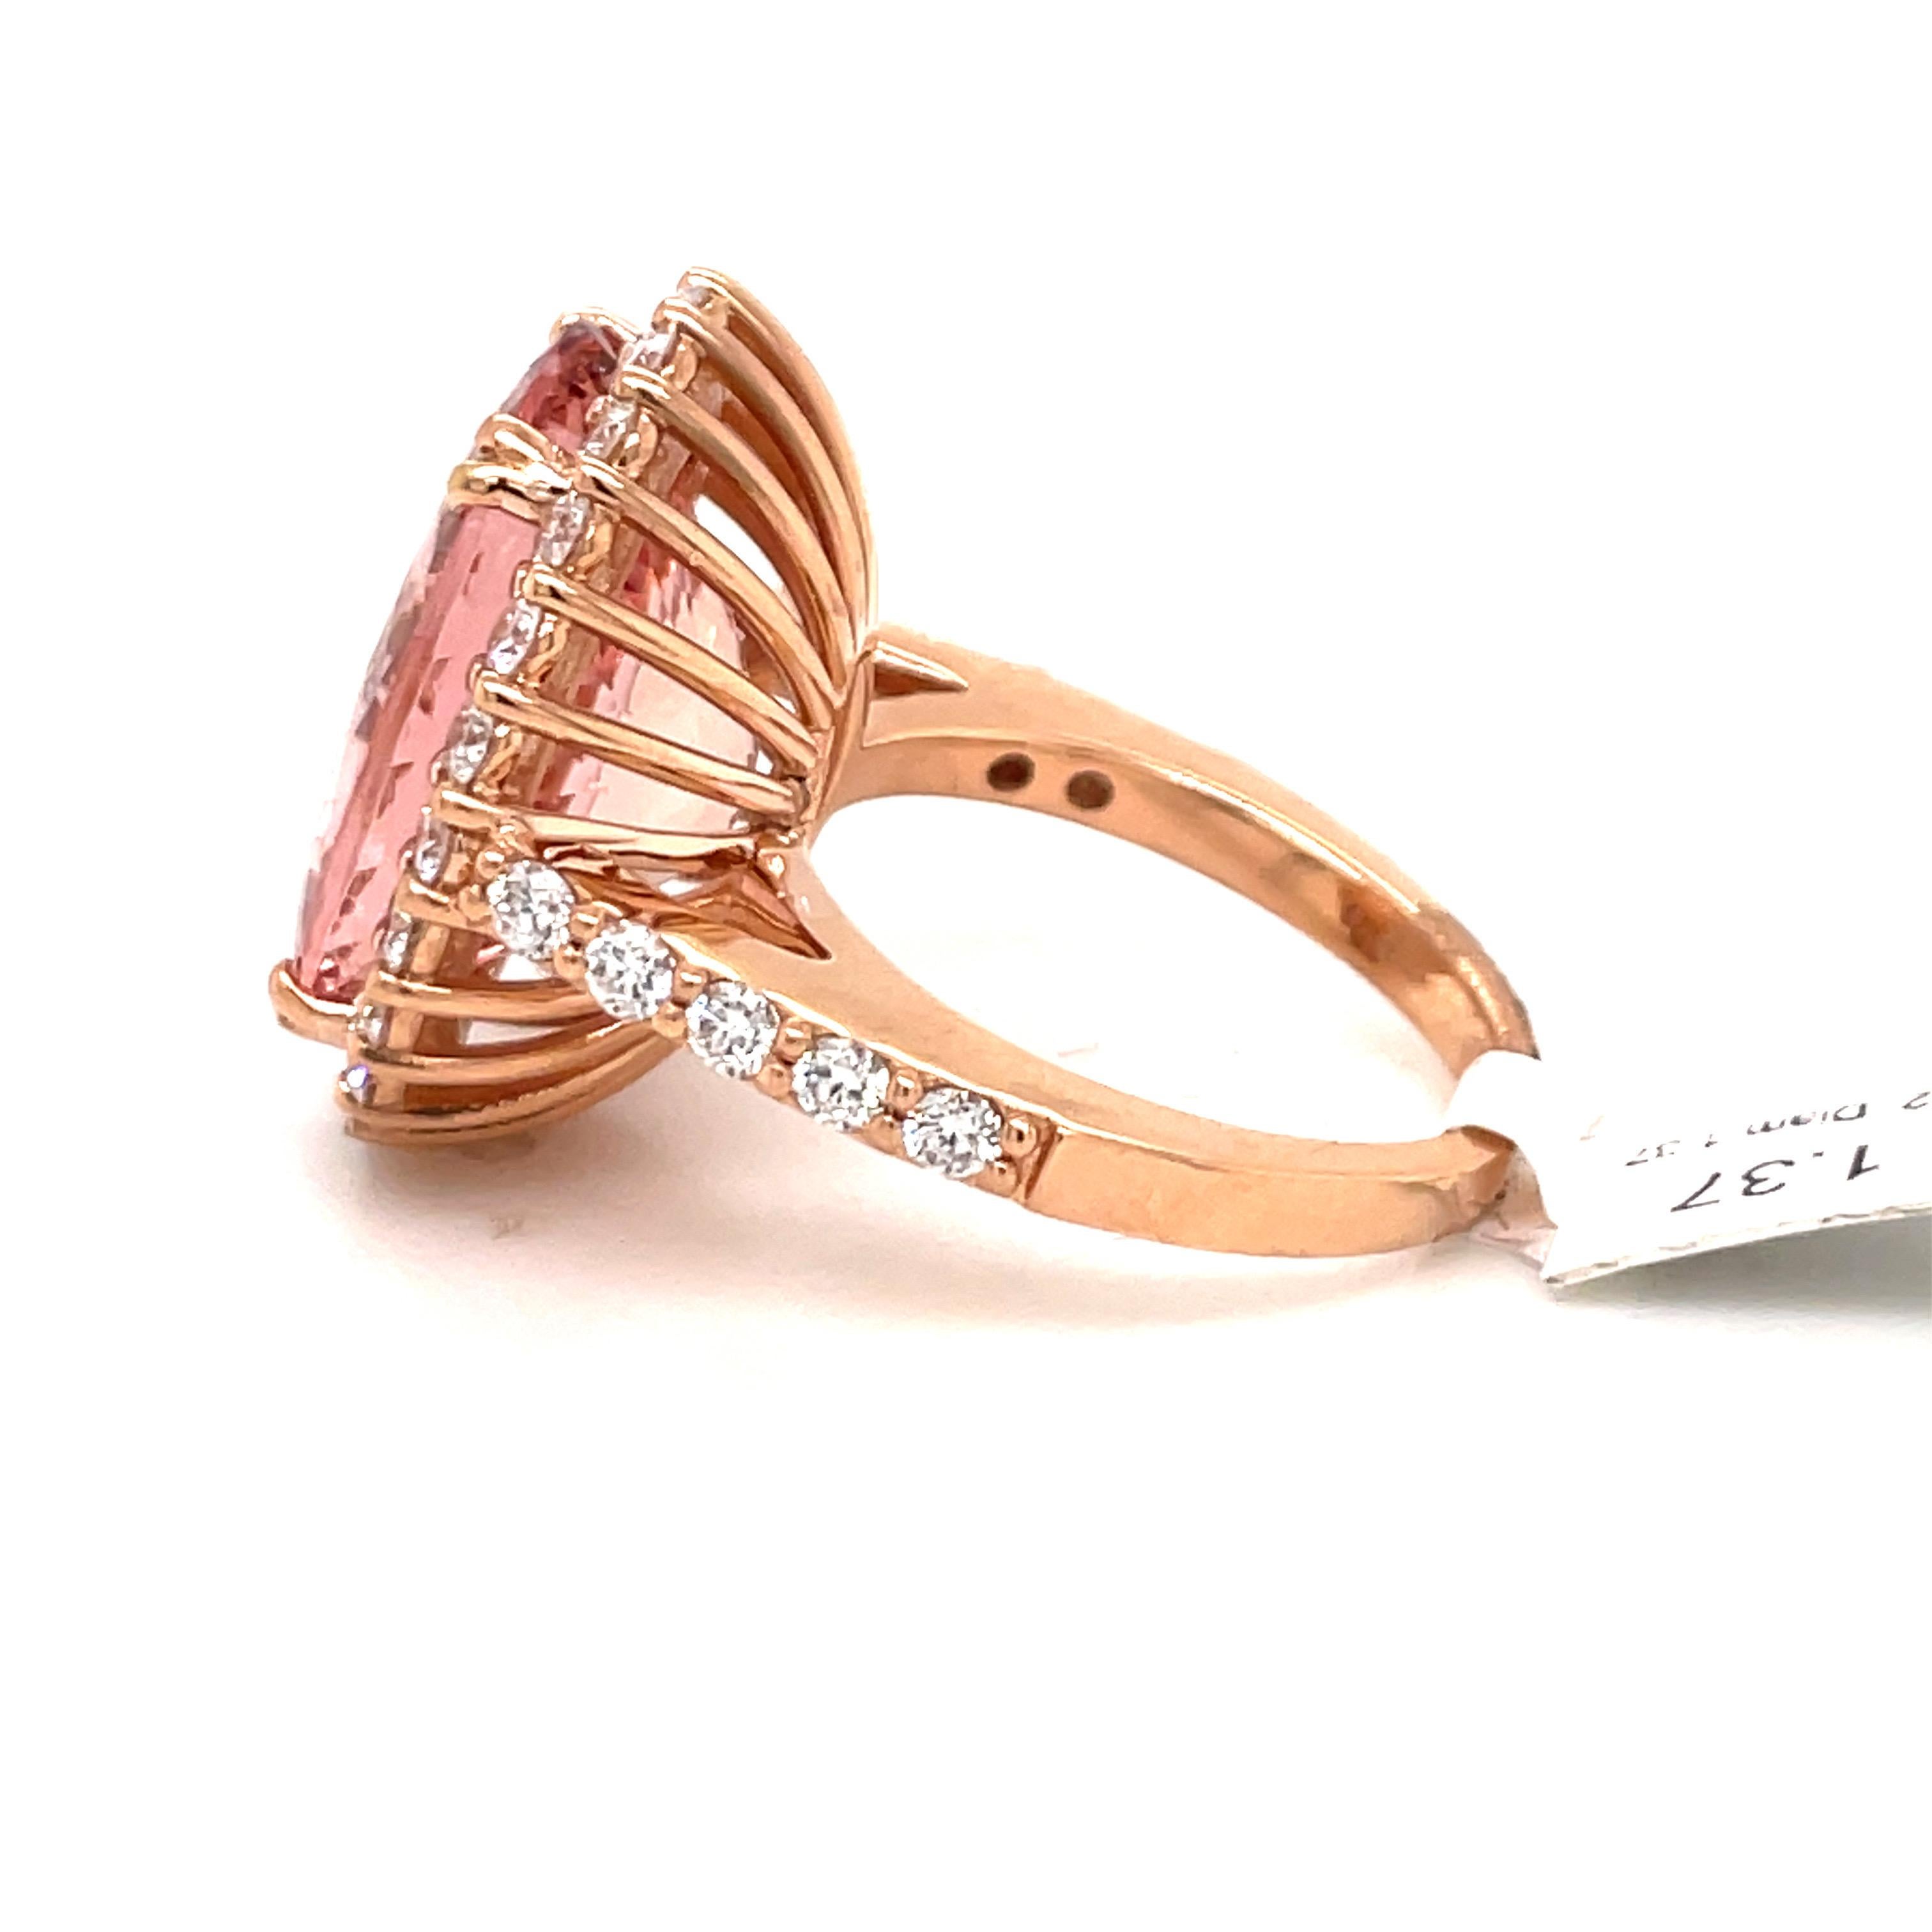 Oval Cut Morganite Diamond Halo Cocktail Ring 12.99 Carats 18 Karat Rose Gold For Sale 3